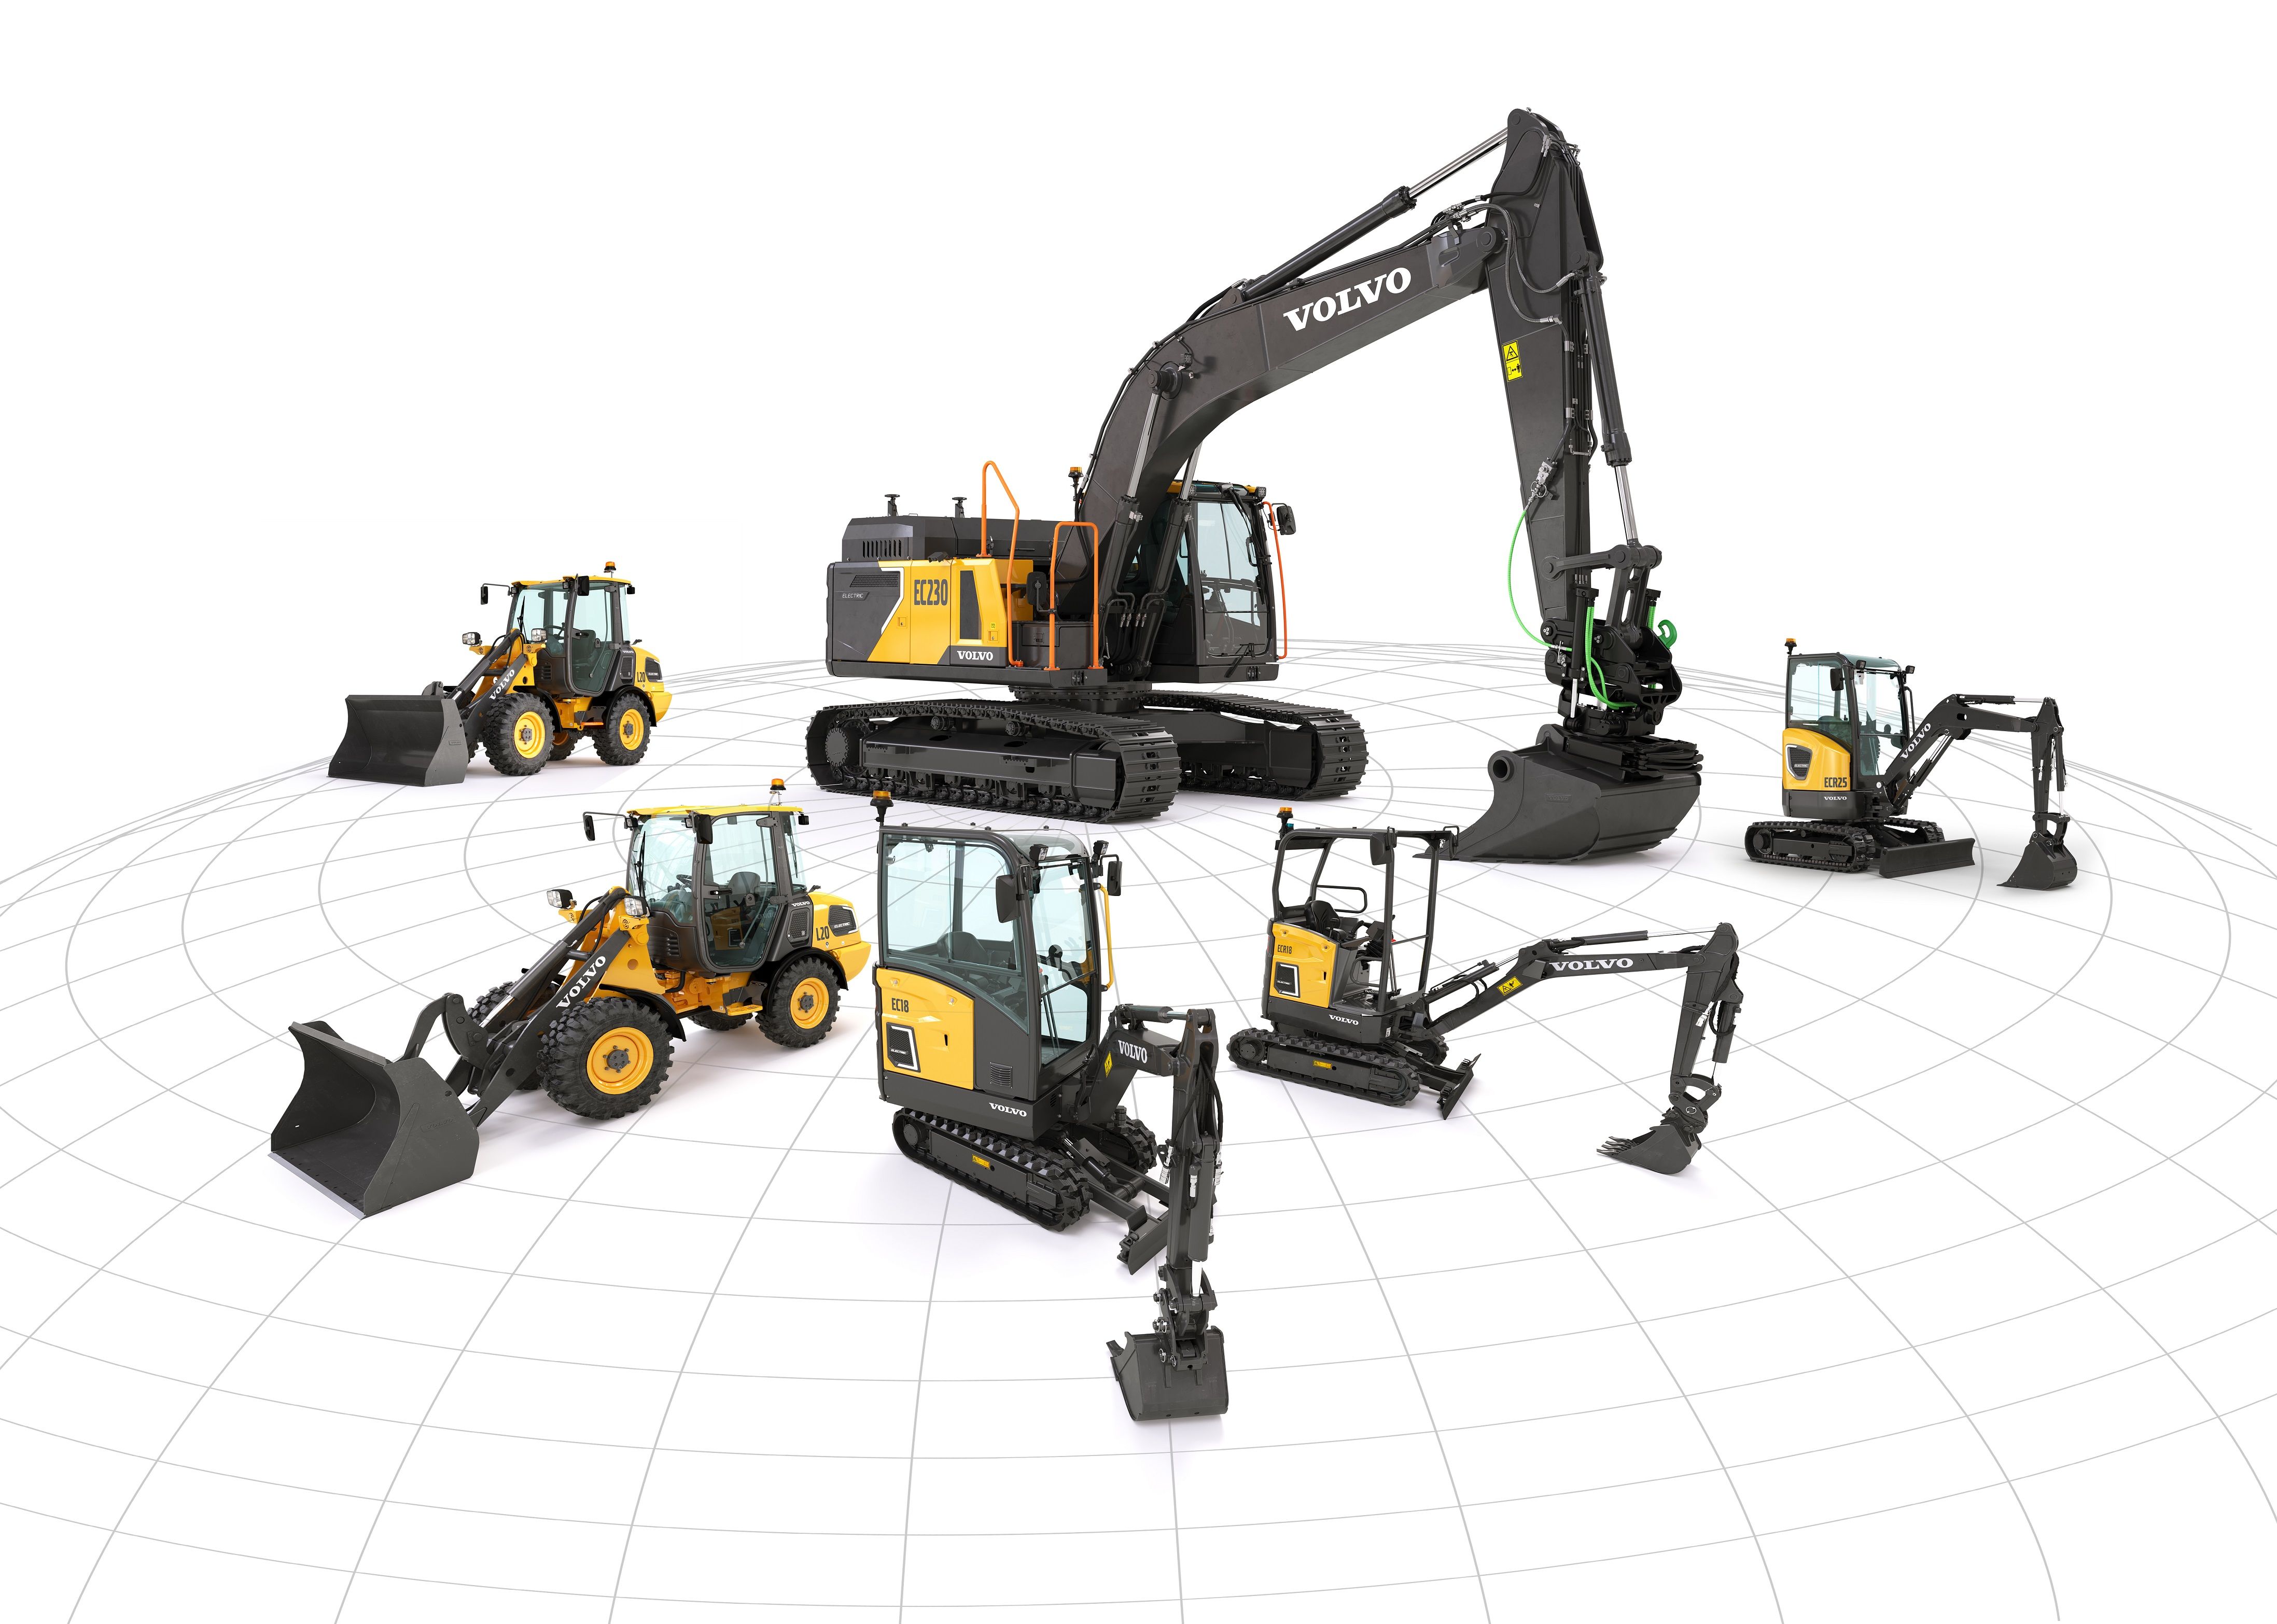 Volvo CE adds electric power to customers sites